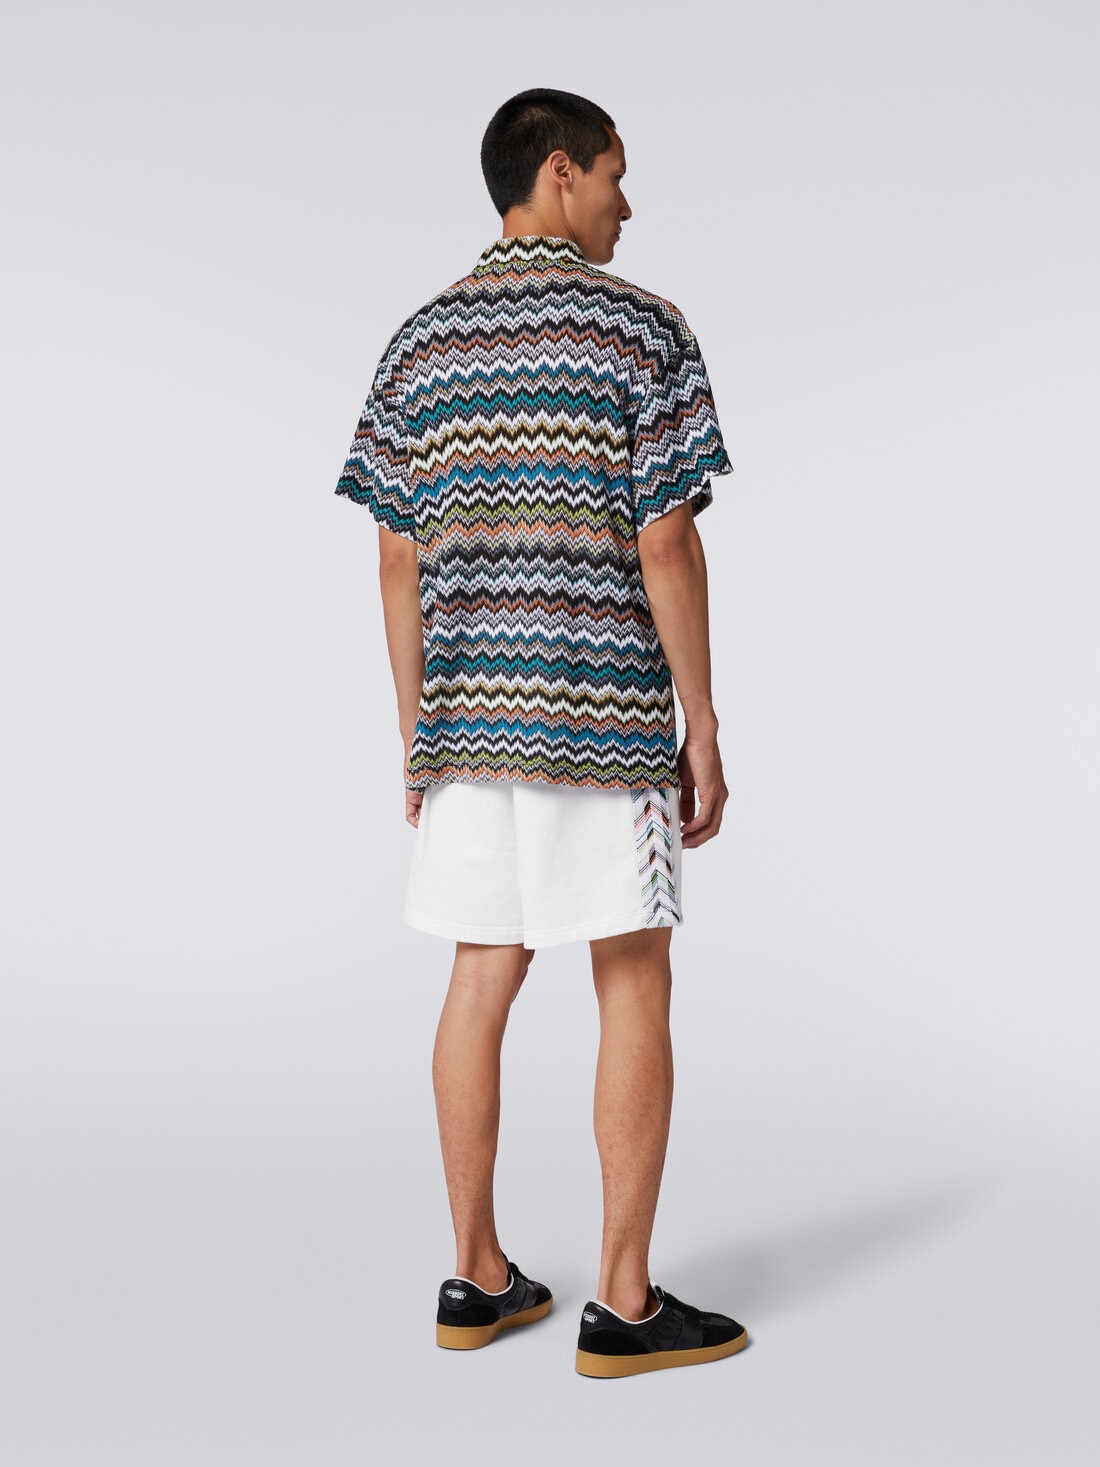 Polo shirt in zigzag cotton and viscose knit, Multicoloured  - TS24S201BR00UUSM9AX - 3